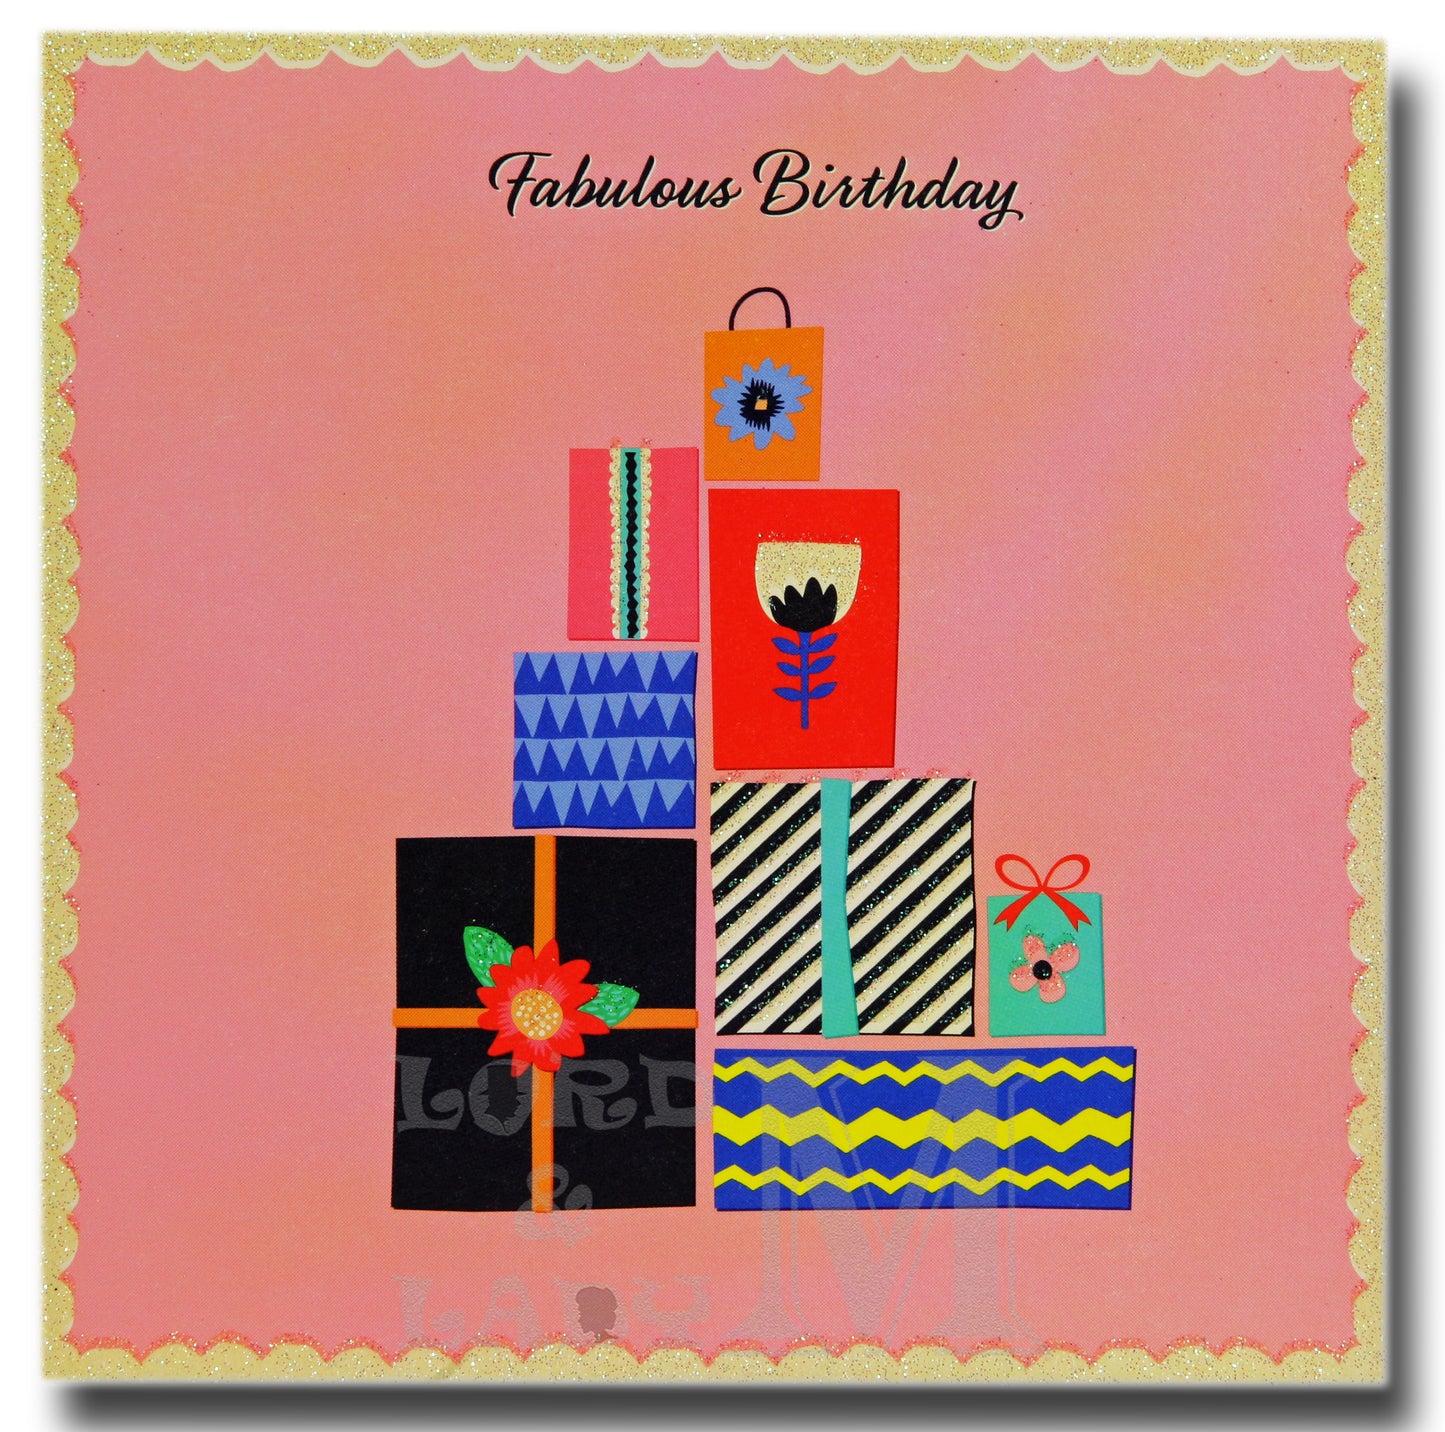 15cm - Fabulous Birthday - Gifts On Pink Card - E